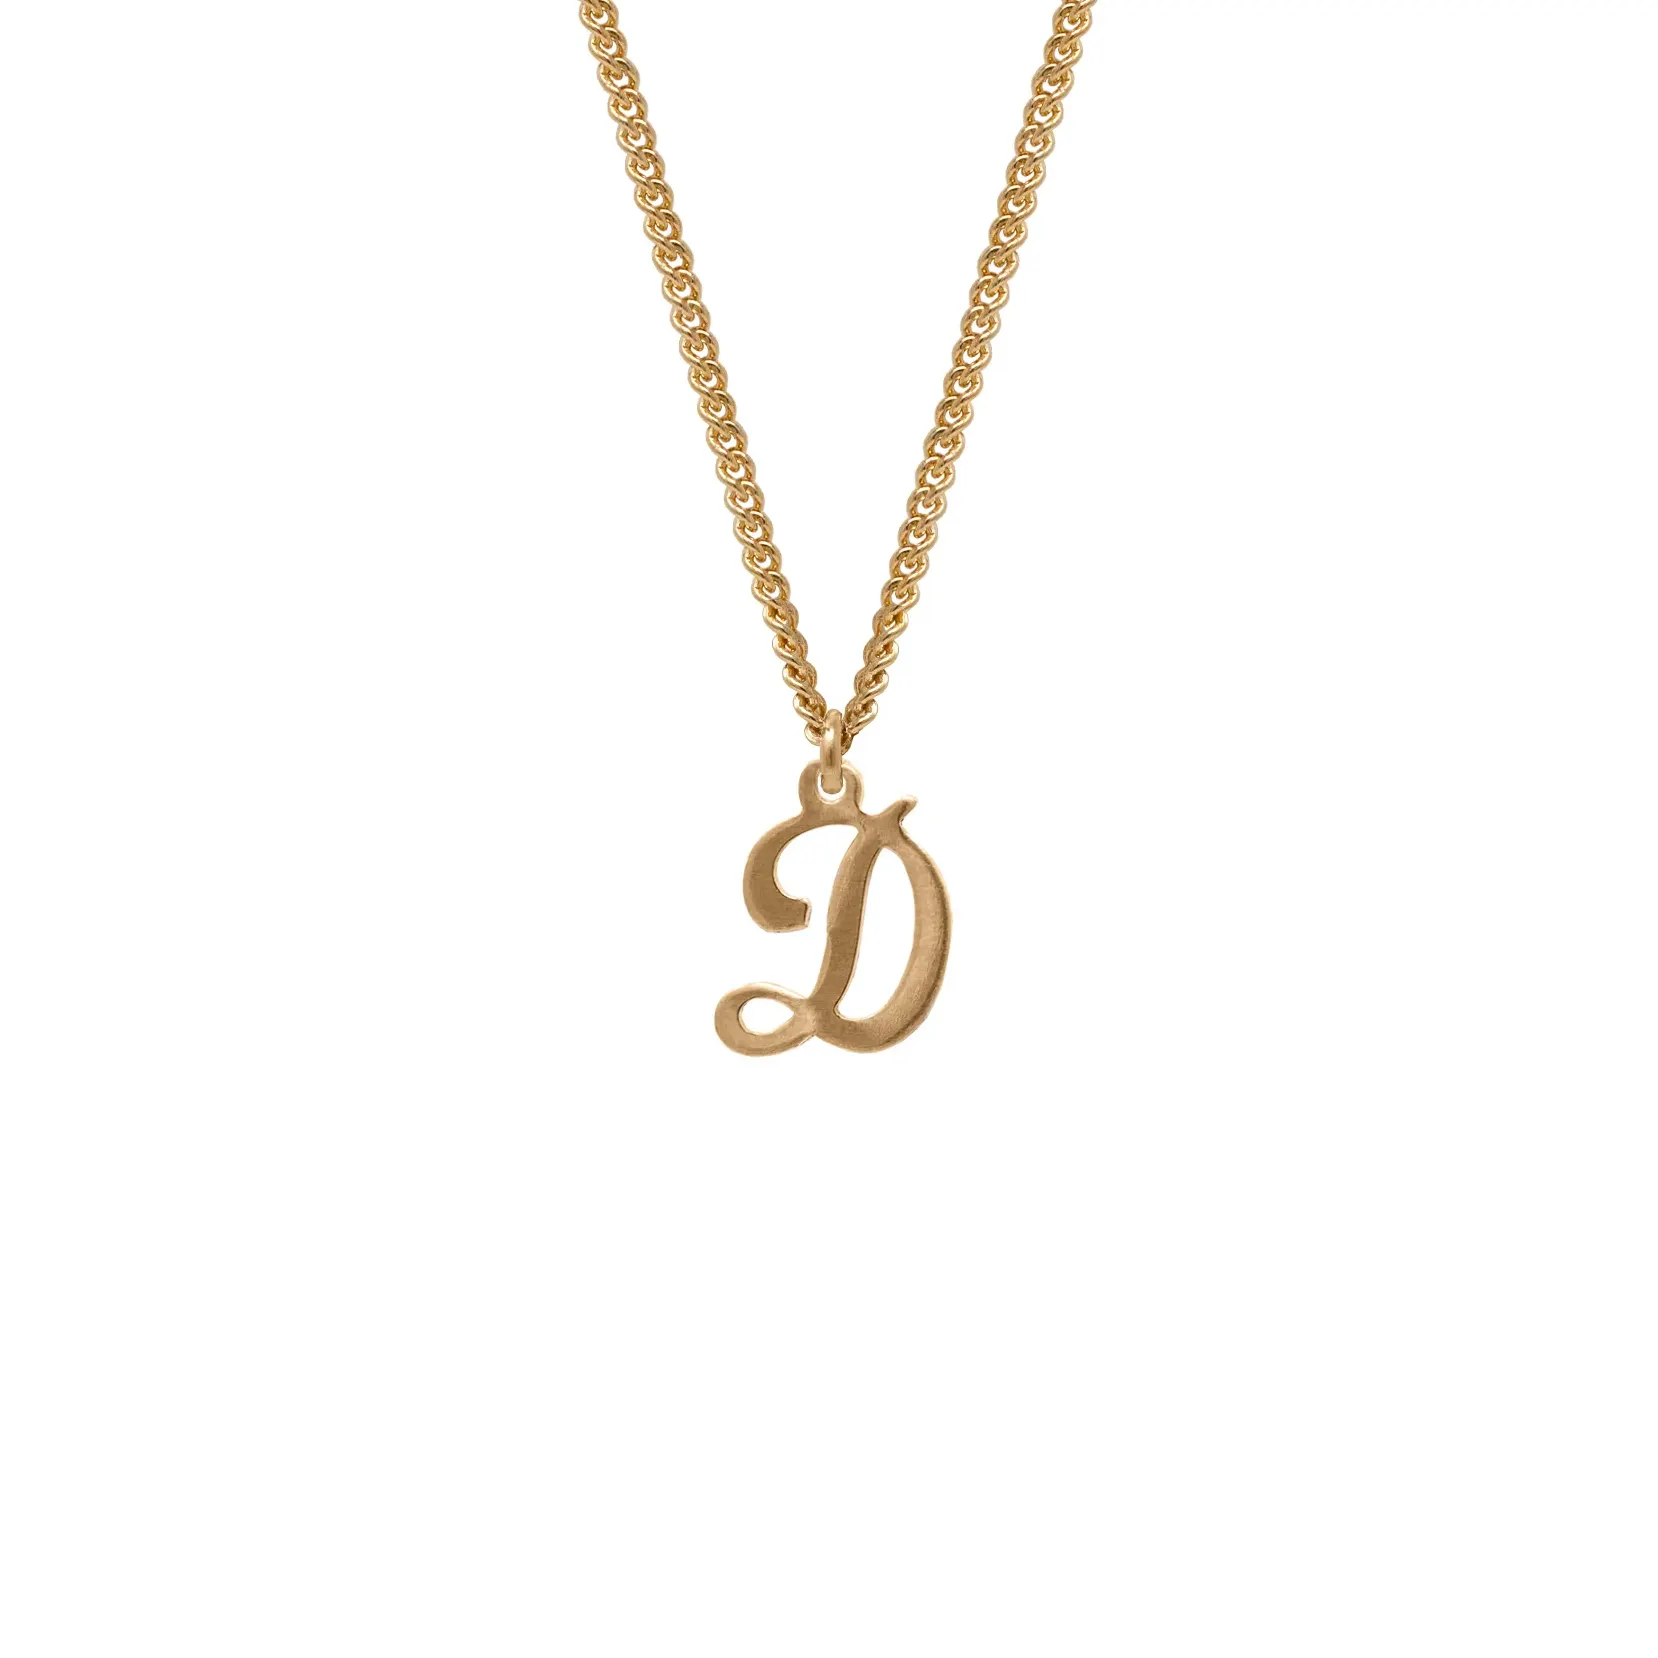 Milskye luxury minimalist personalized 925 silver 18K gold plated mini curb chain and a cursive initial pendant necklace